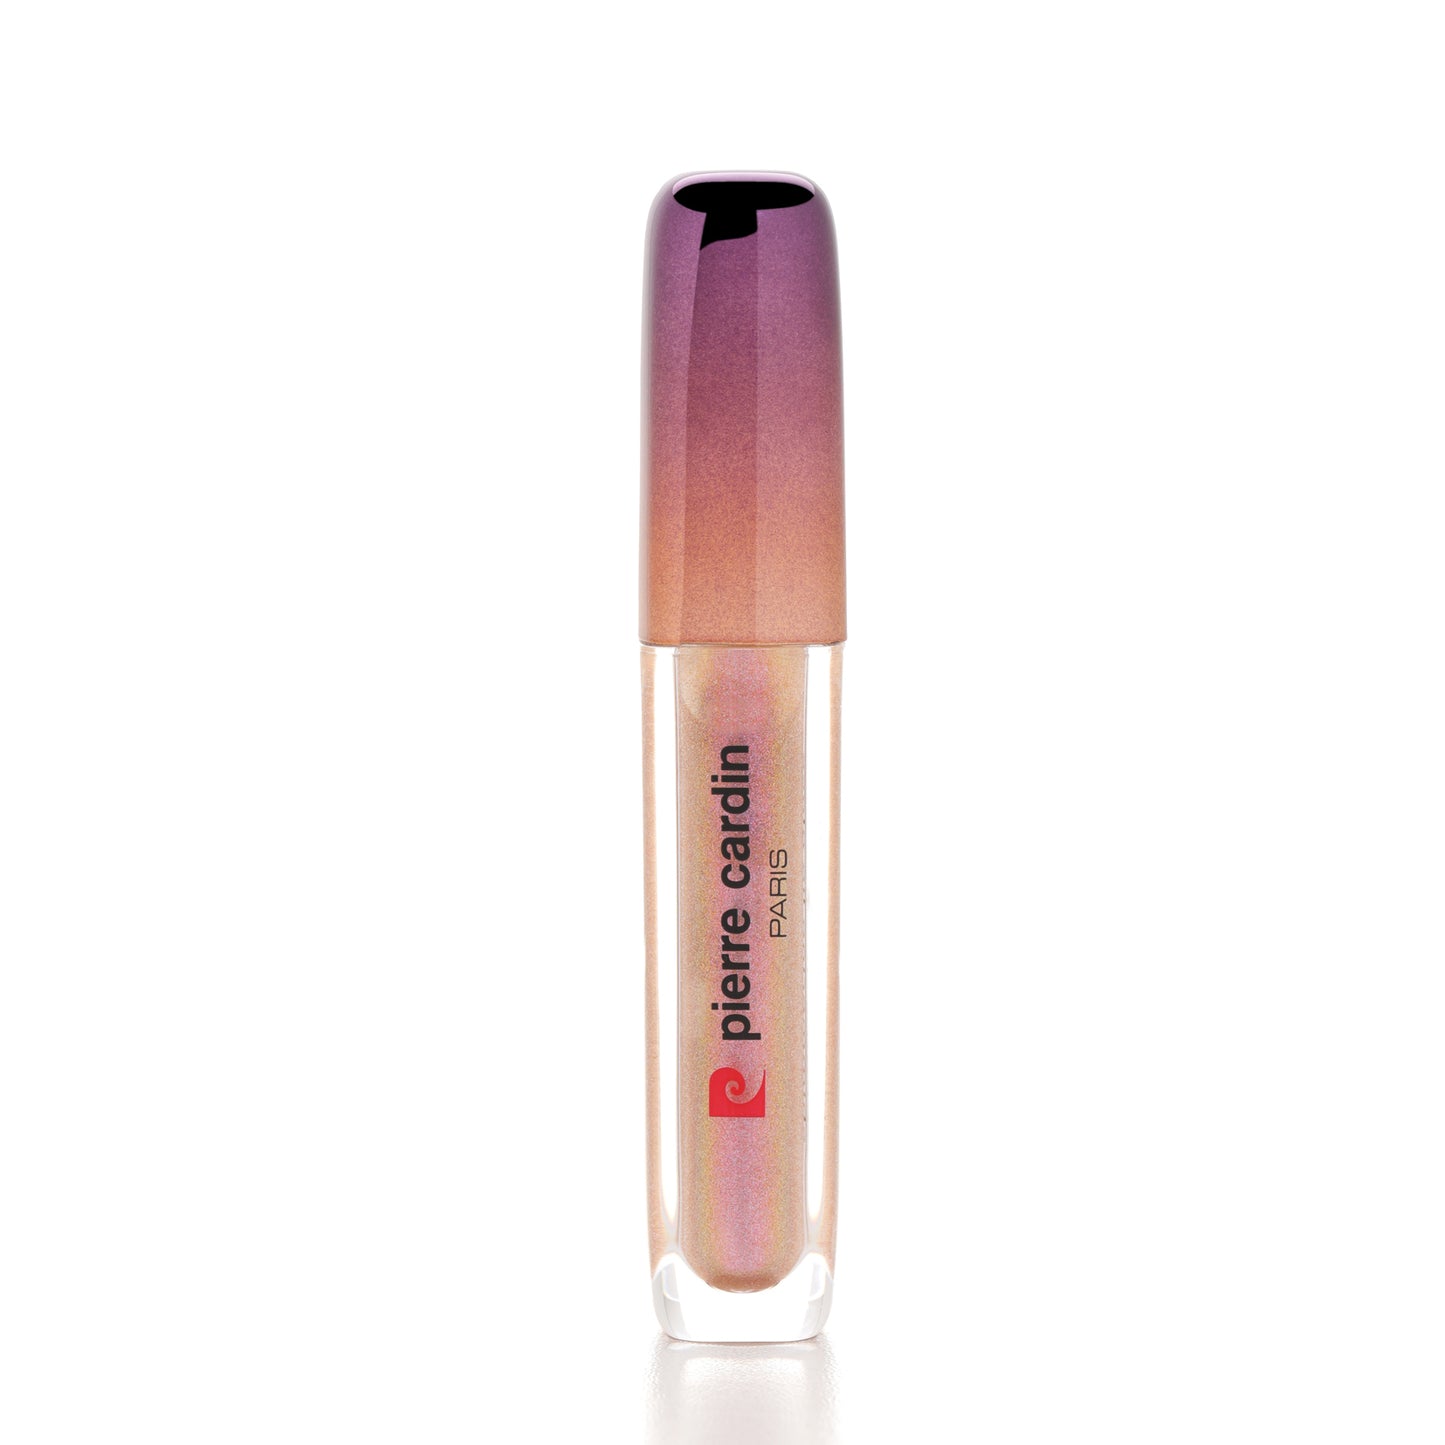 Pierre Cardin Shimmering Lipgloss Champagne 277 - 5 ml